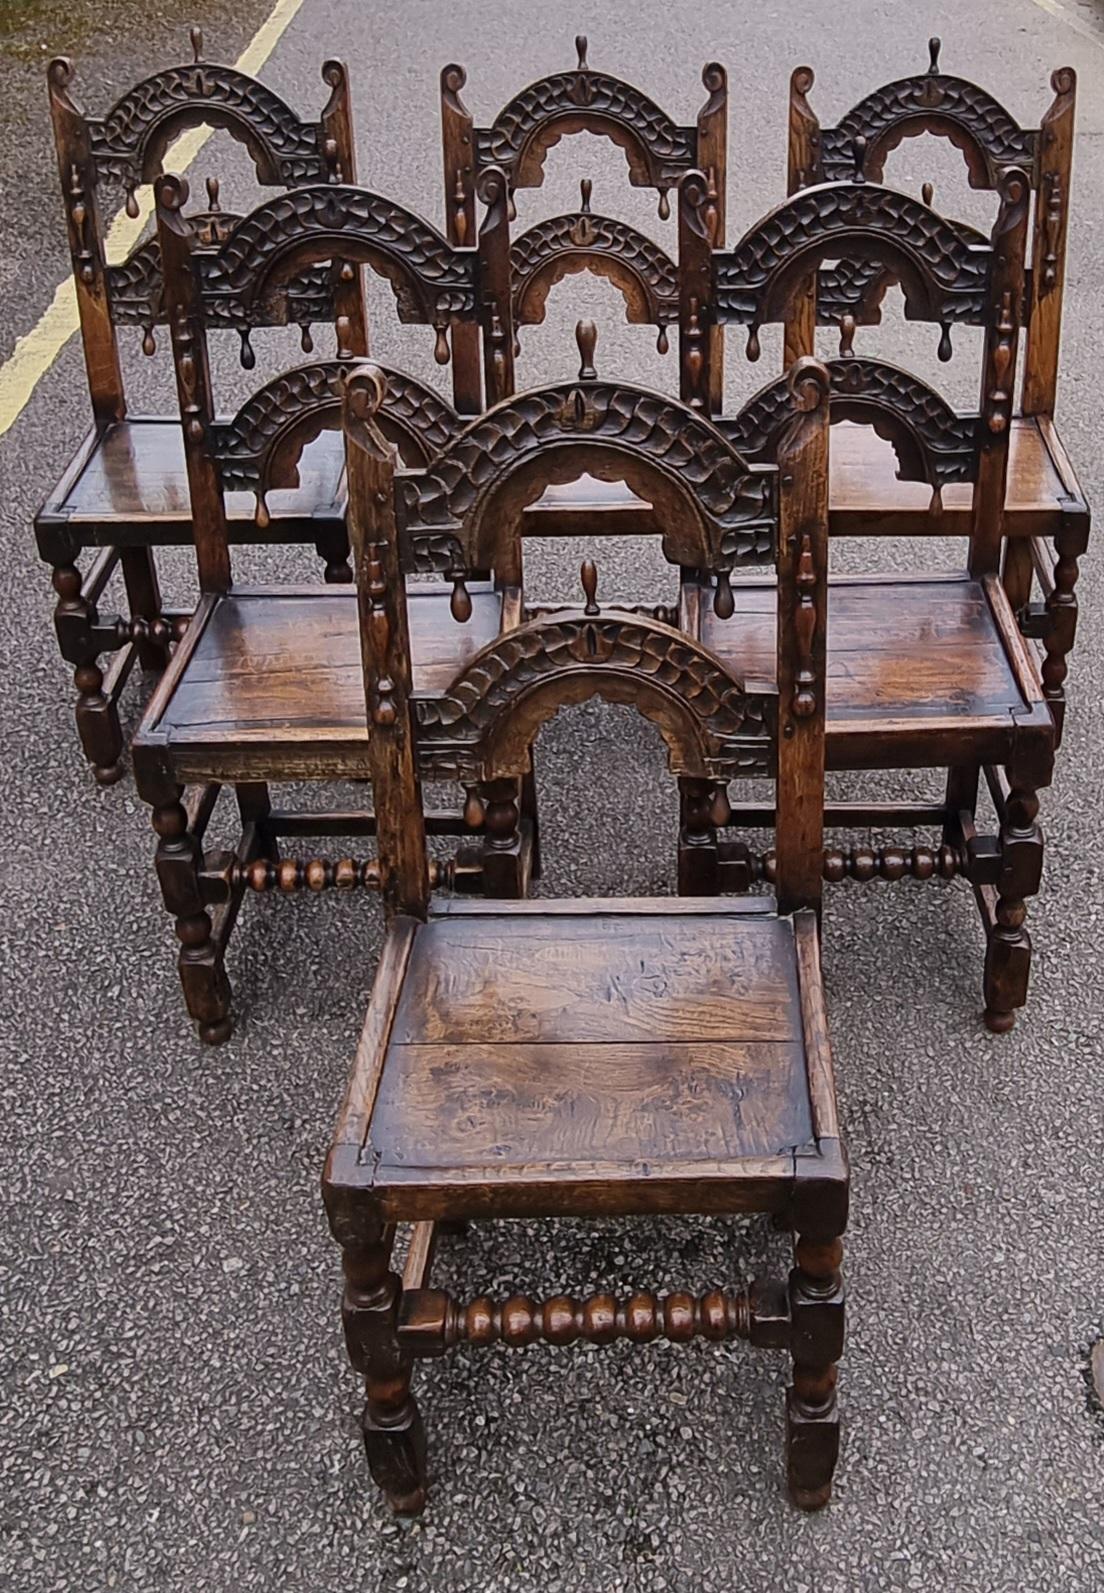 A rare true set of original 17th-century dining chairs/back stools, circa 1670 . These chairs showcase a fabulous colour and patina and unique design adding to their character and charm.

The chairs are in good usable antique condition , having